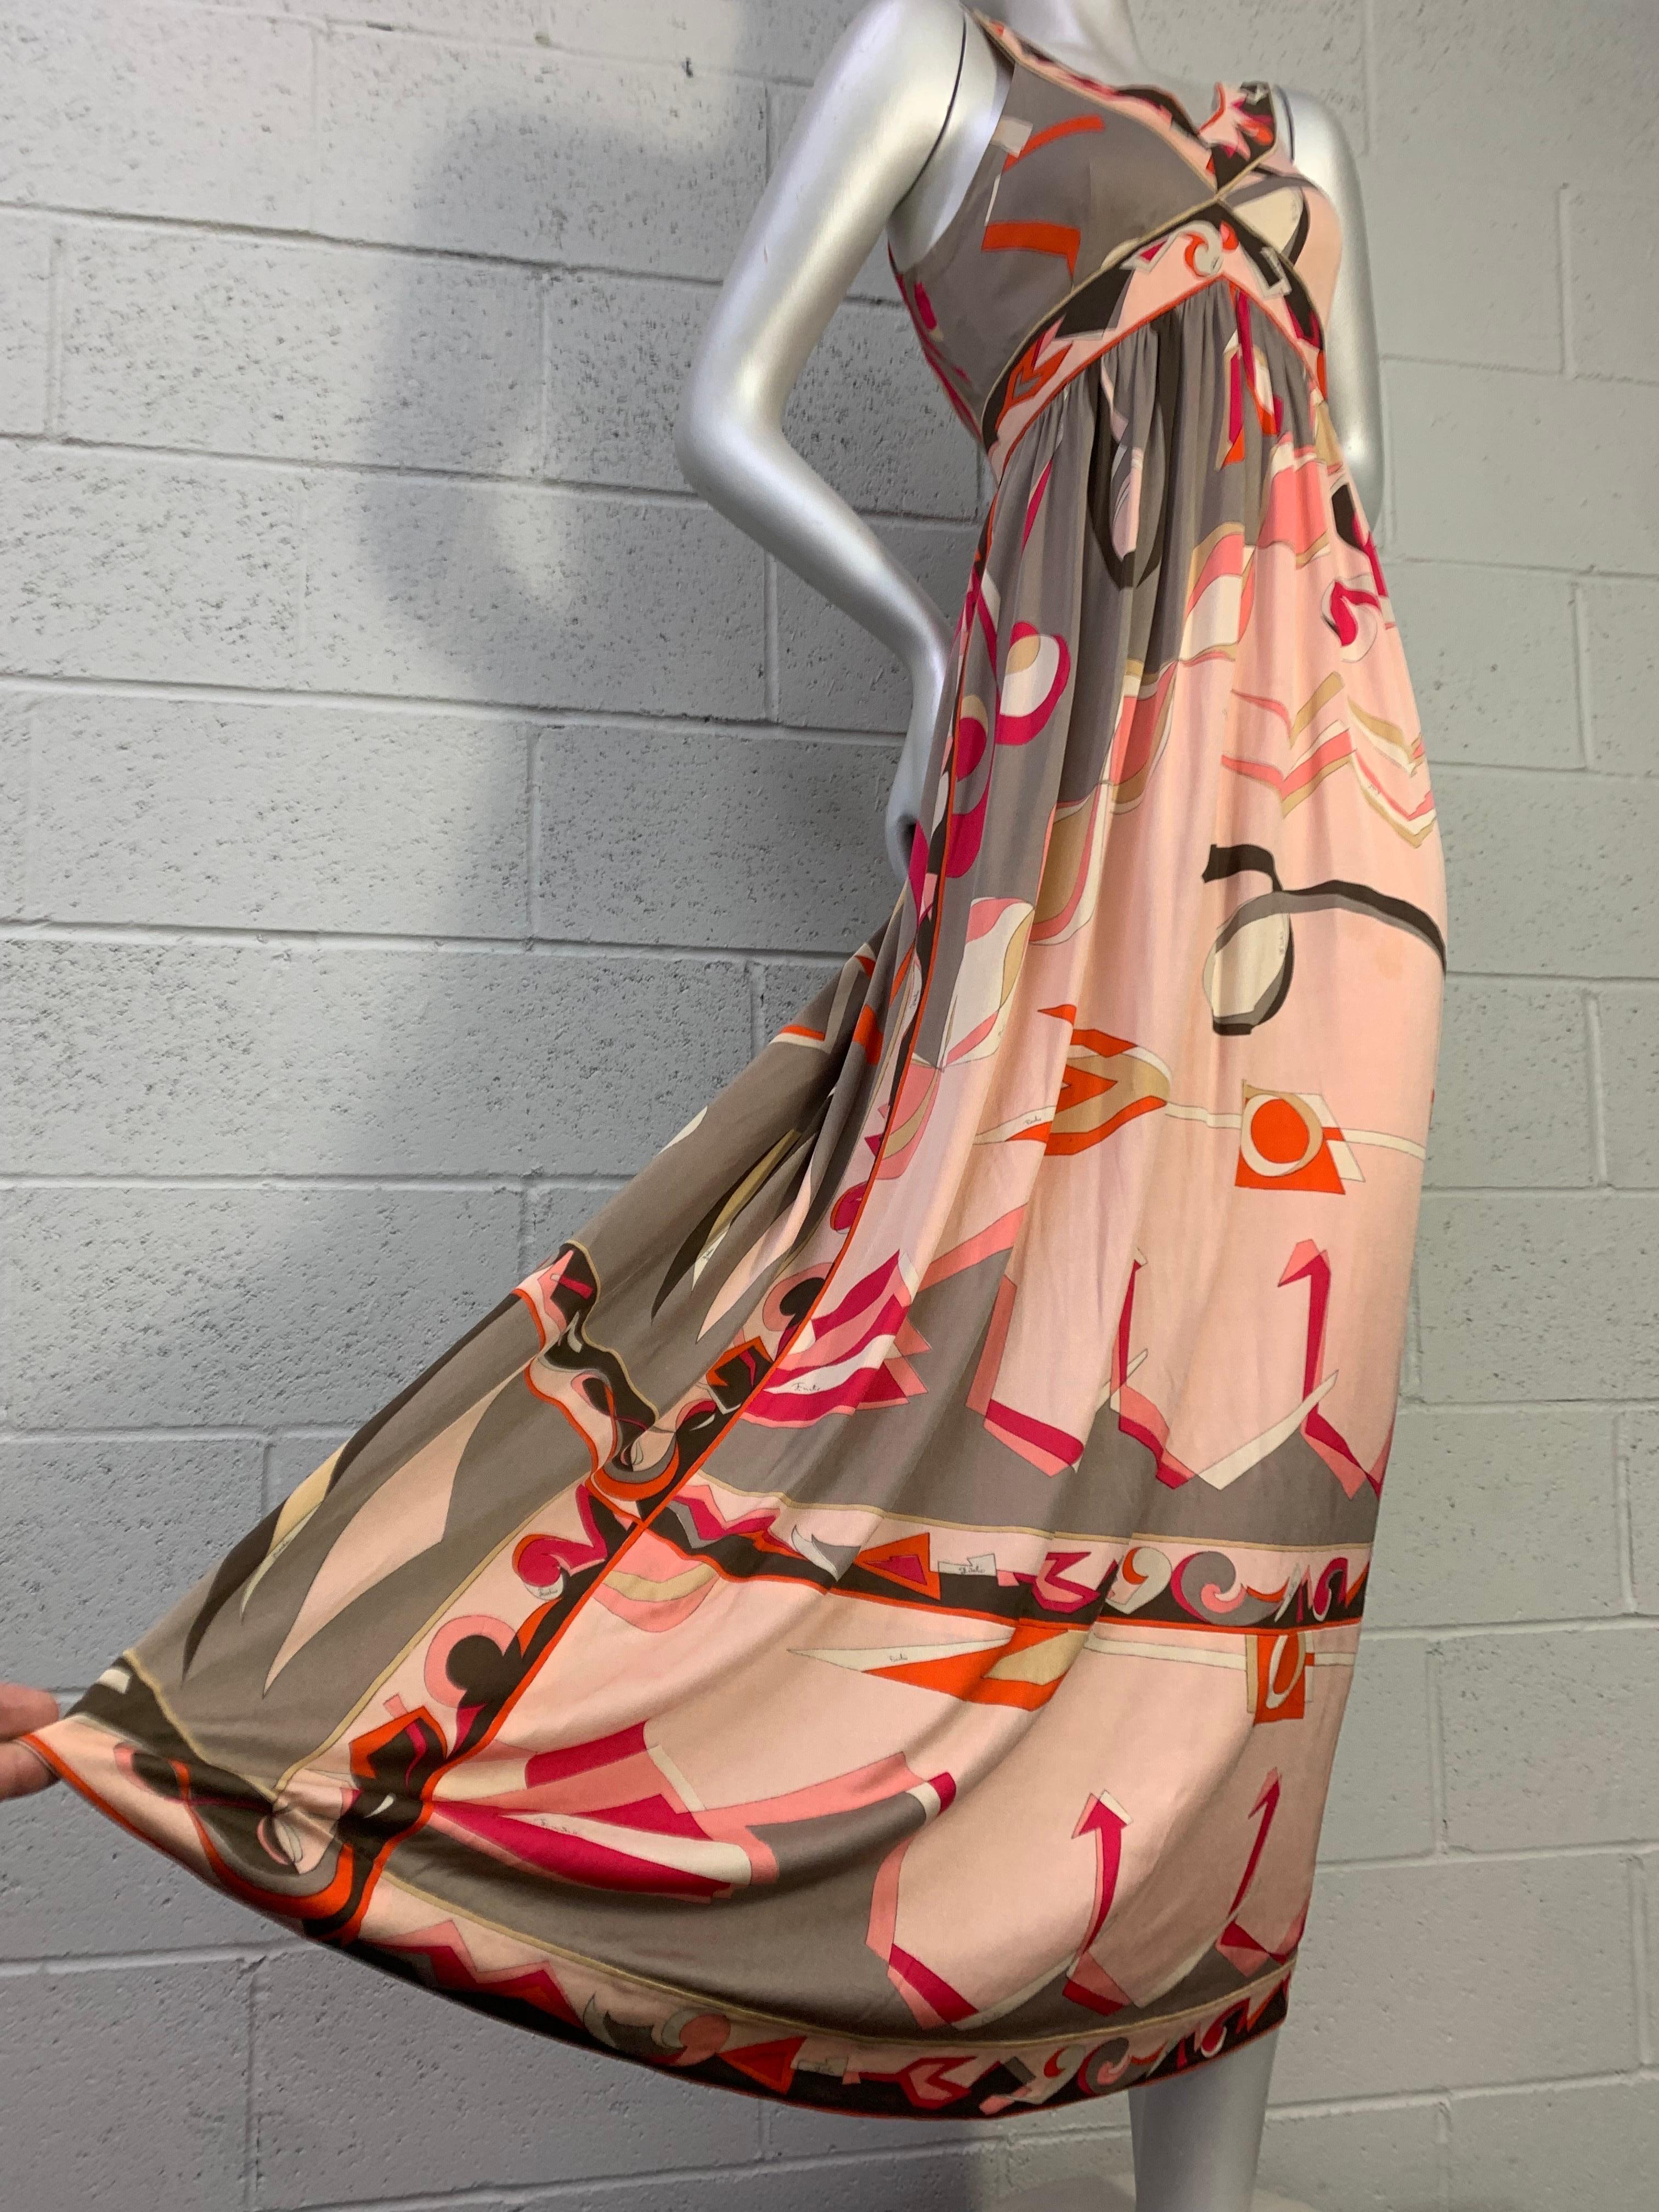 1960s Emilio Pucci Silk Jersey Maxi Dress with Banded, Contoured Bodice in Classic Pucci Print of Arrows and Origami Motifs in Peach, Taupe and Coral. Back zipper, gathered waist, full peach silk muslin lining. US Modern size 8. 